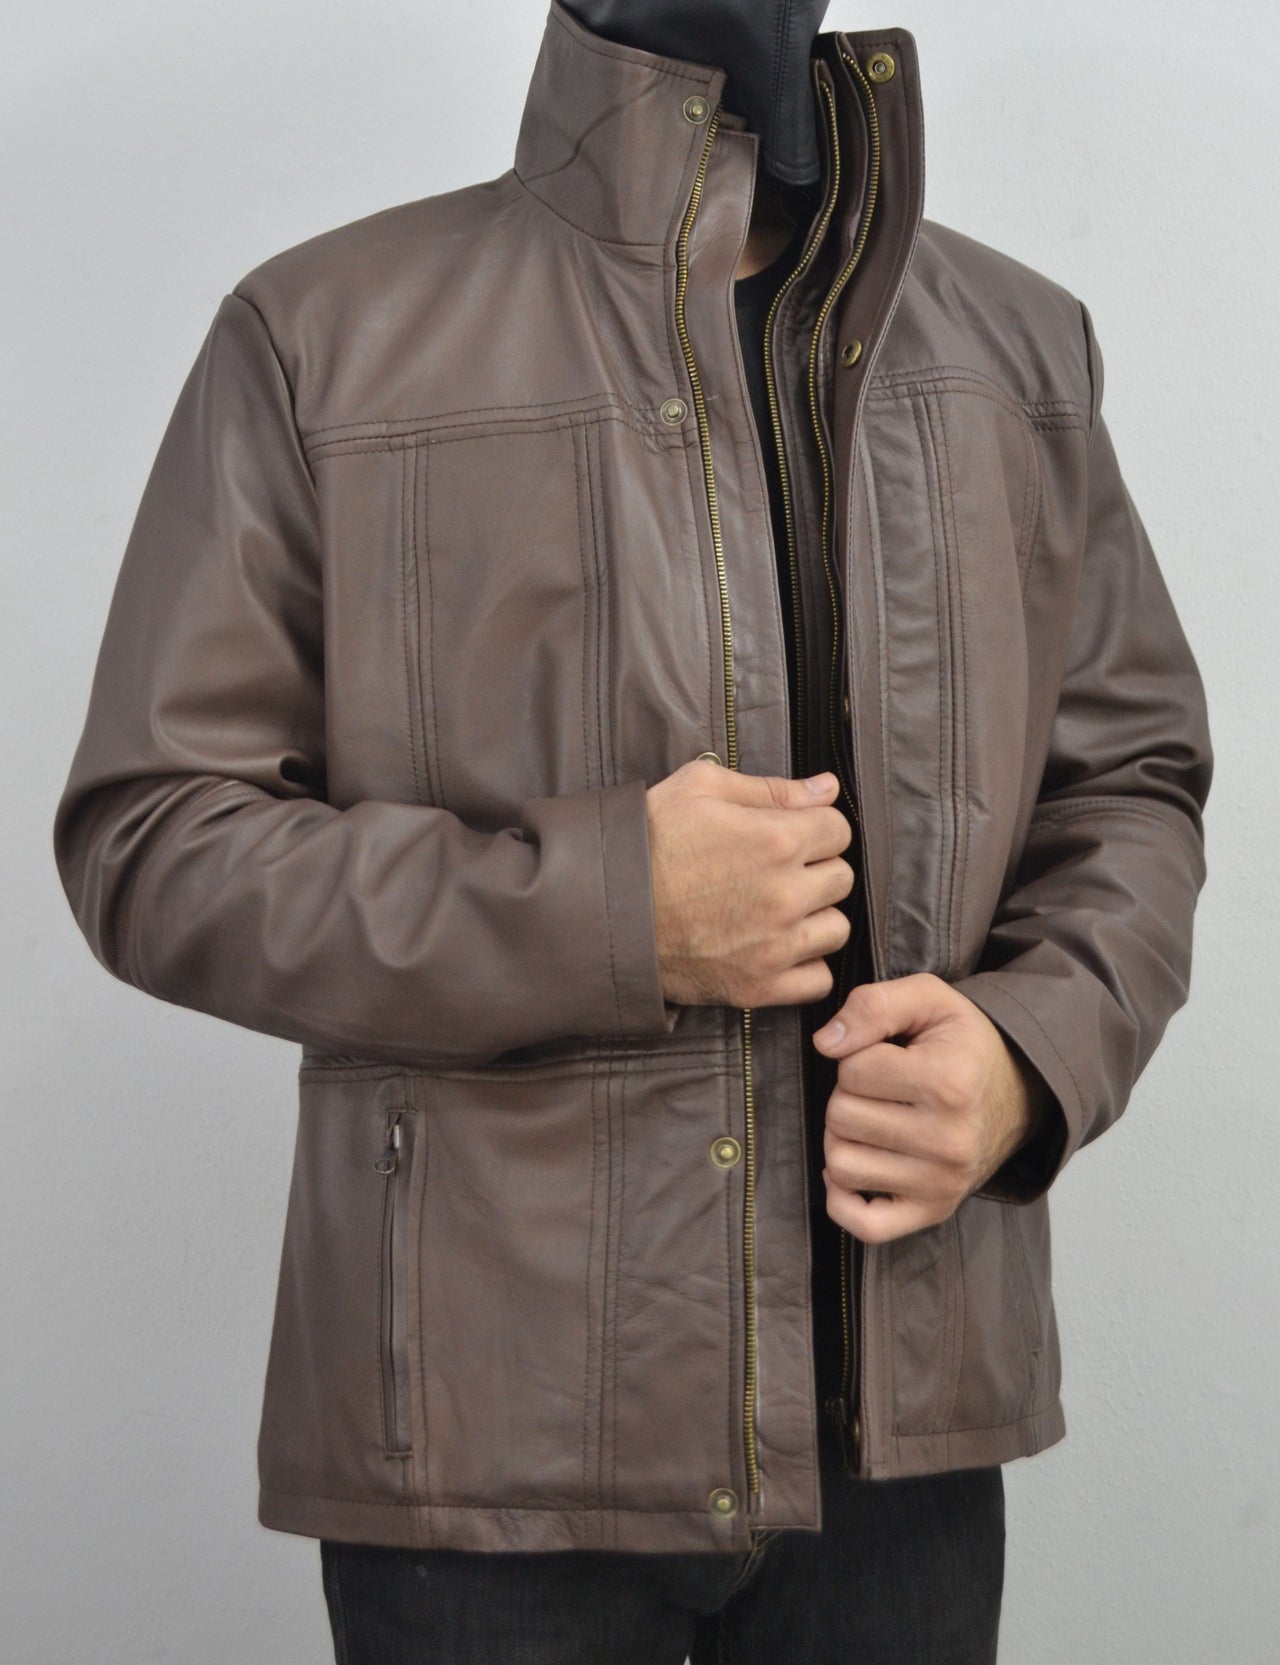 Men's Brown Double Closure Cafe Racer Genuine Leather Jacket